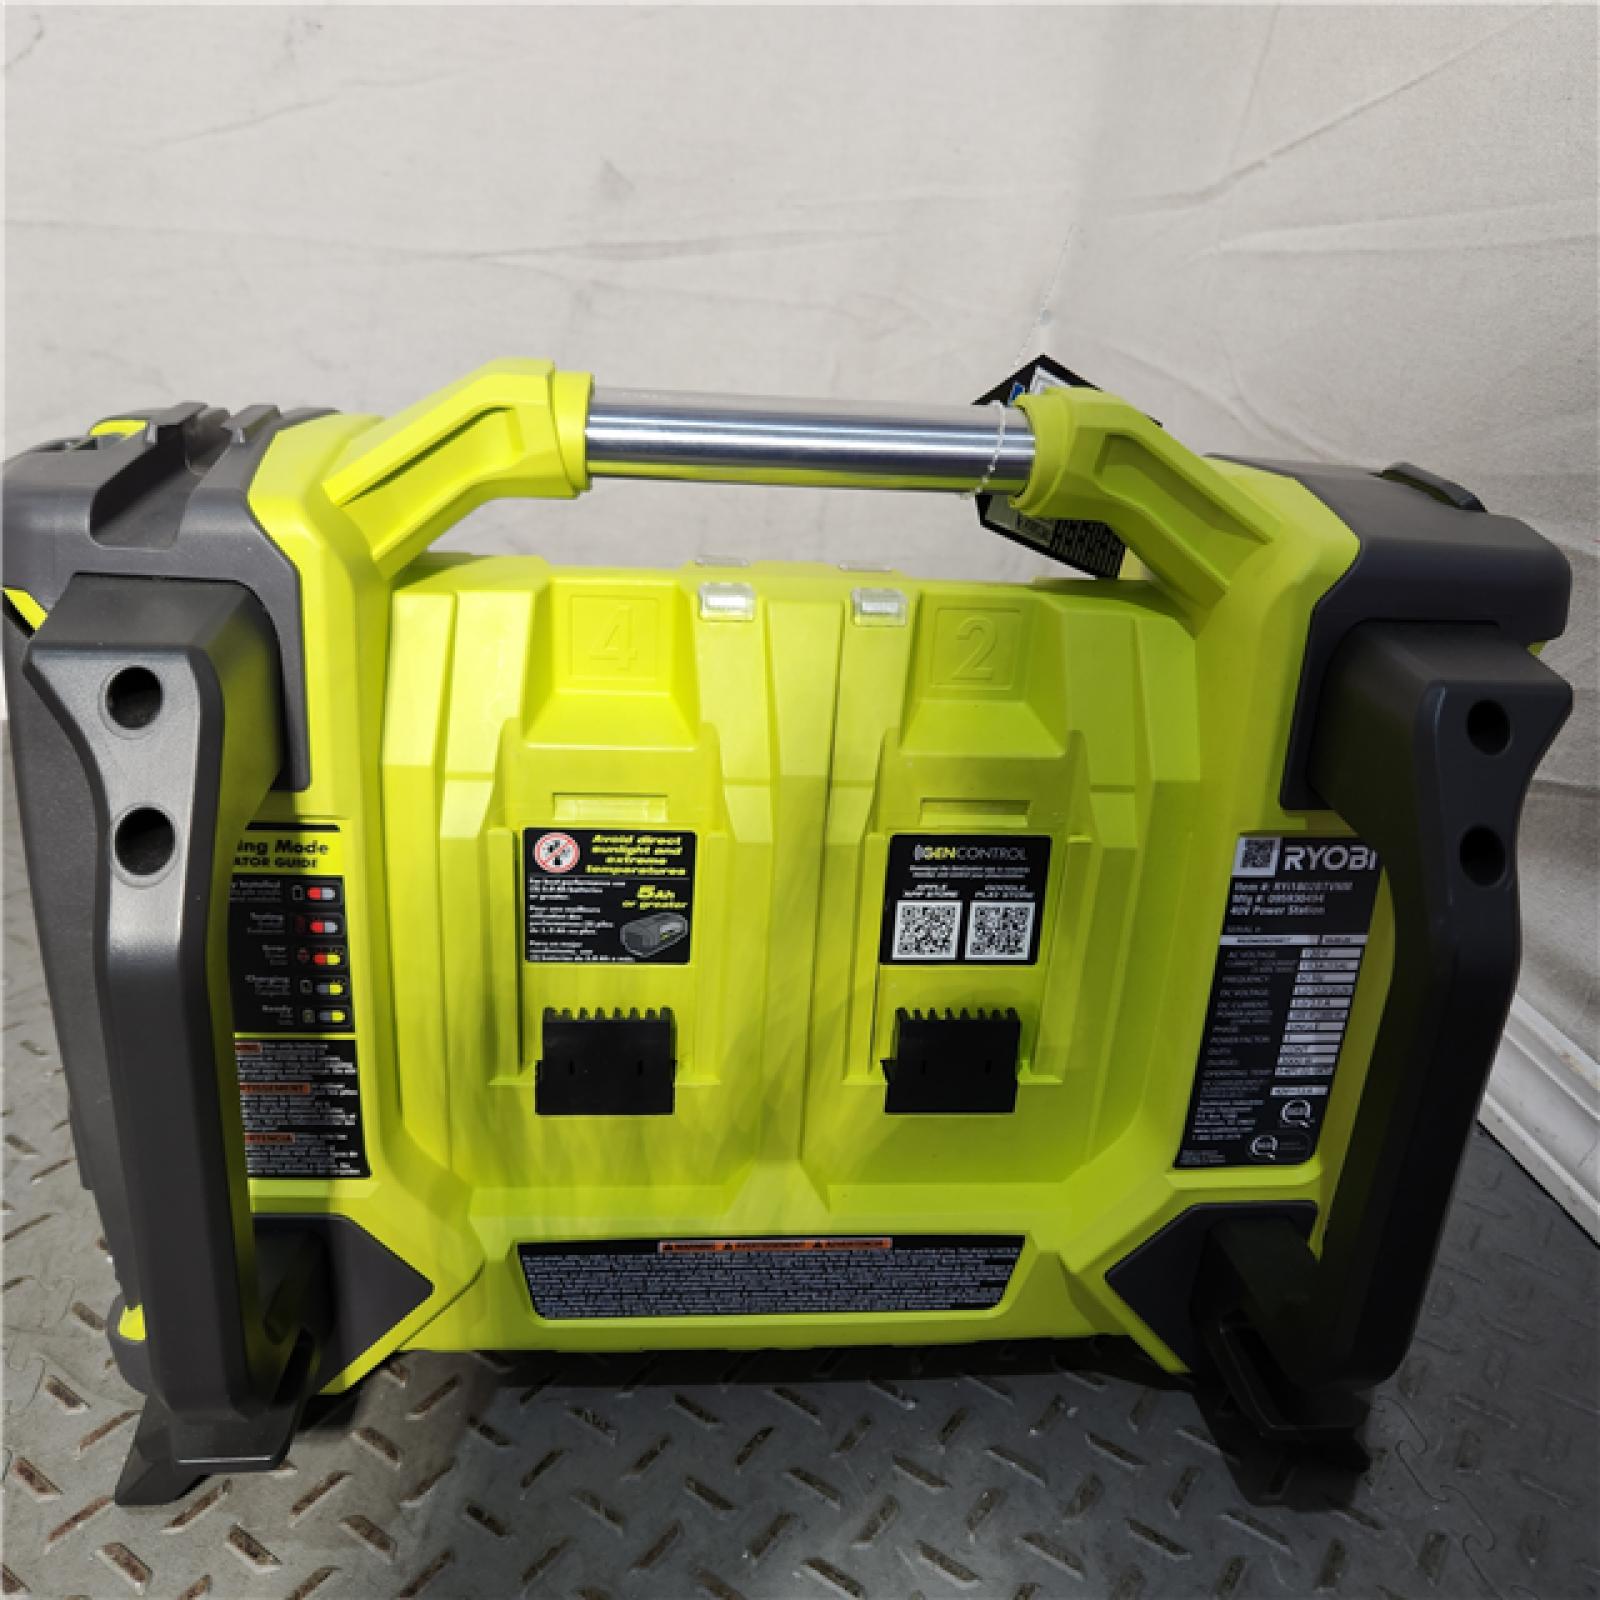 HOUSTON Location-AS-IS-RYOBI 40V 1800-Watt Portable Battery Power Station Inverter Generator and 4-Port Charger (Tool Only) APPEARS IN NEW! Condition